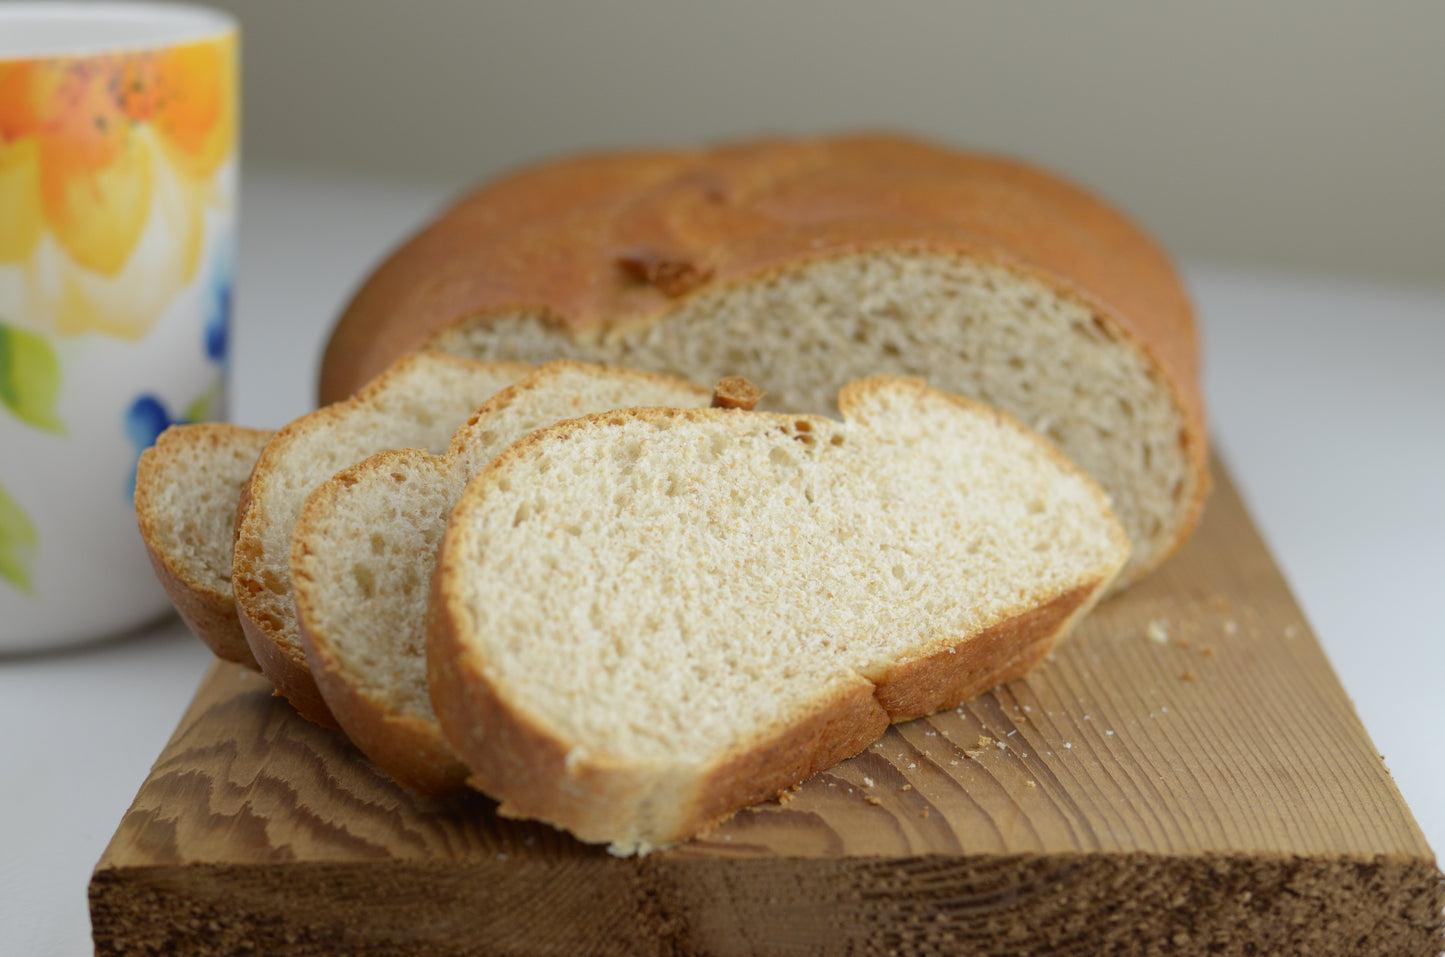 Anise Seed (Aniseed) Loaf